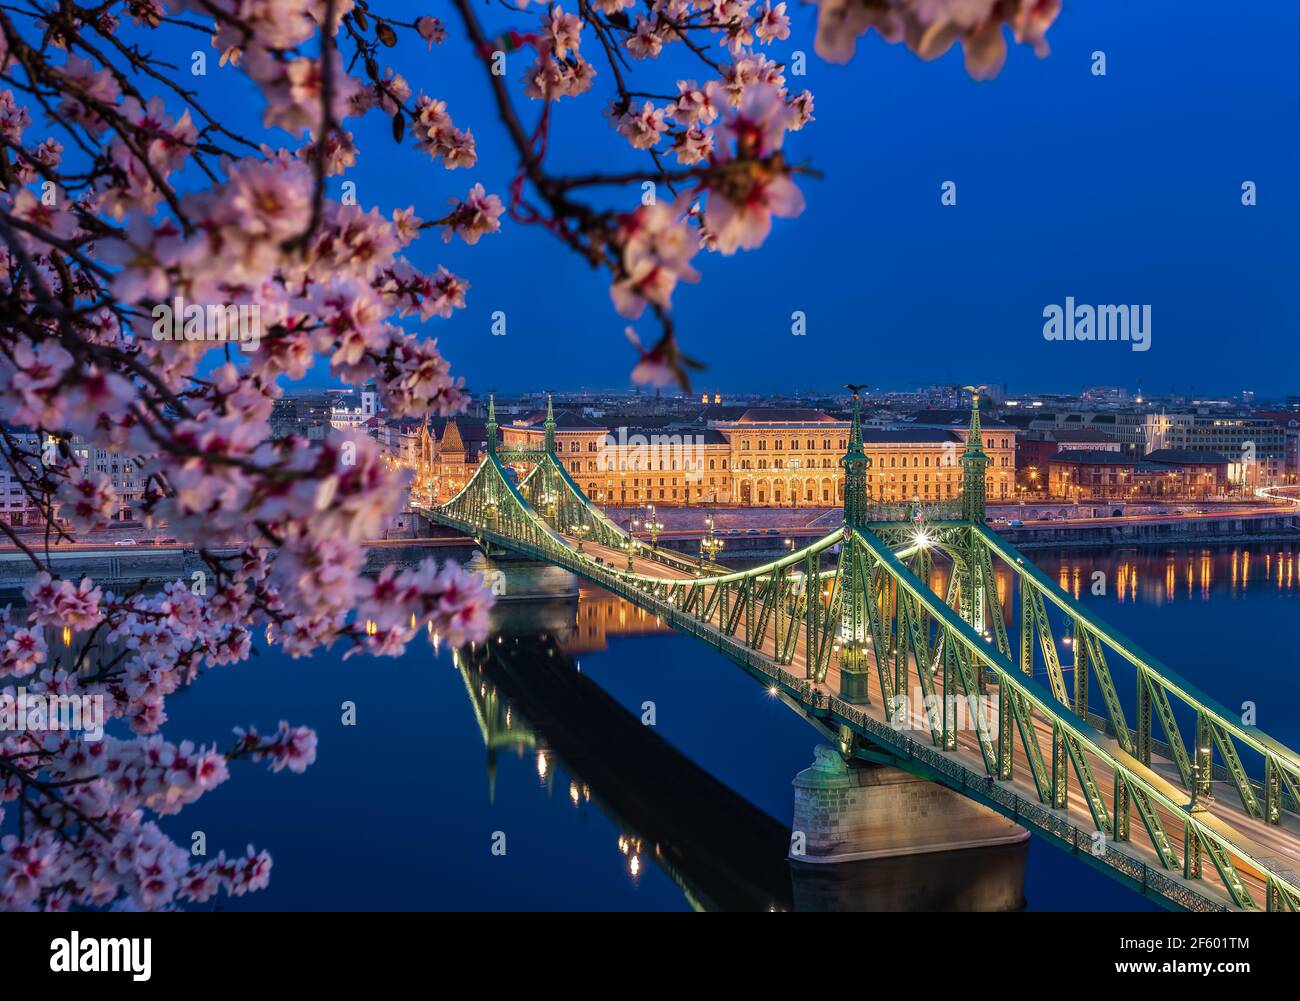 Budapest, Hungary - Illuminated Liberty Bridge over River Danube at dusk with cherry blossom tree at foreground taken from Gellert Hill. Spring has ar Stock Photo